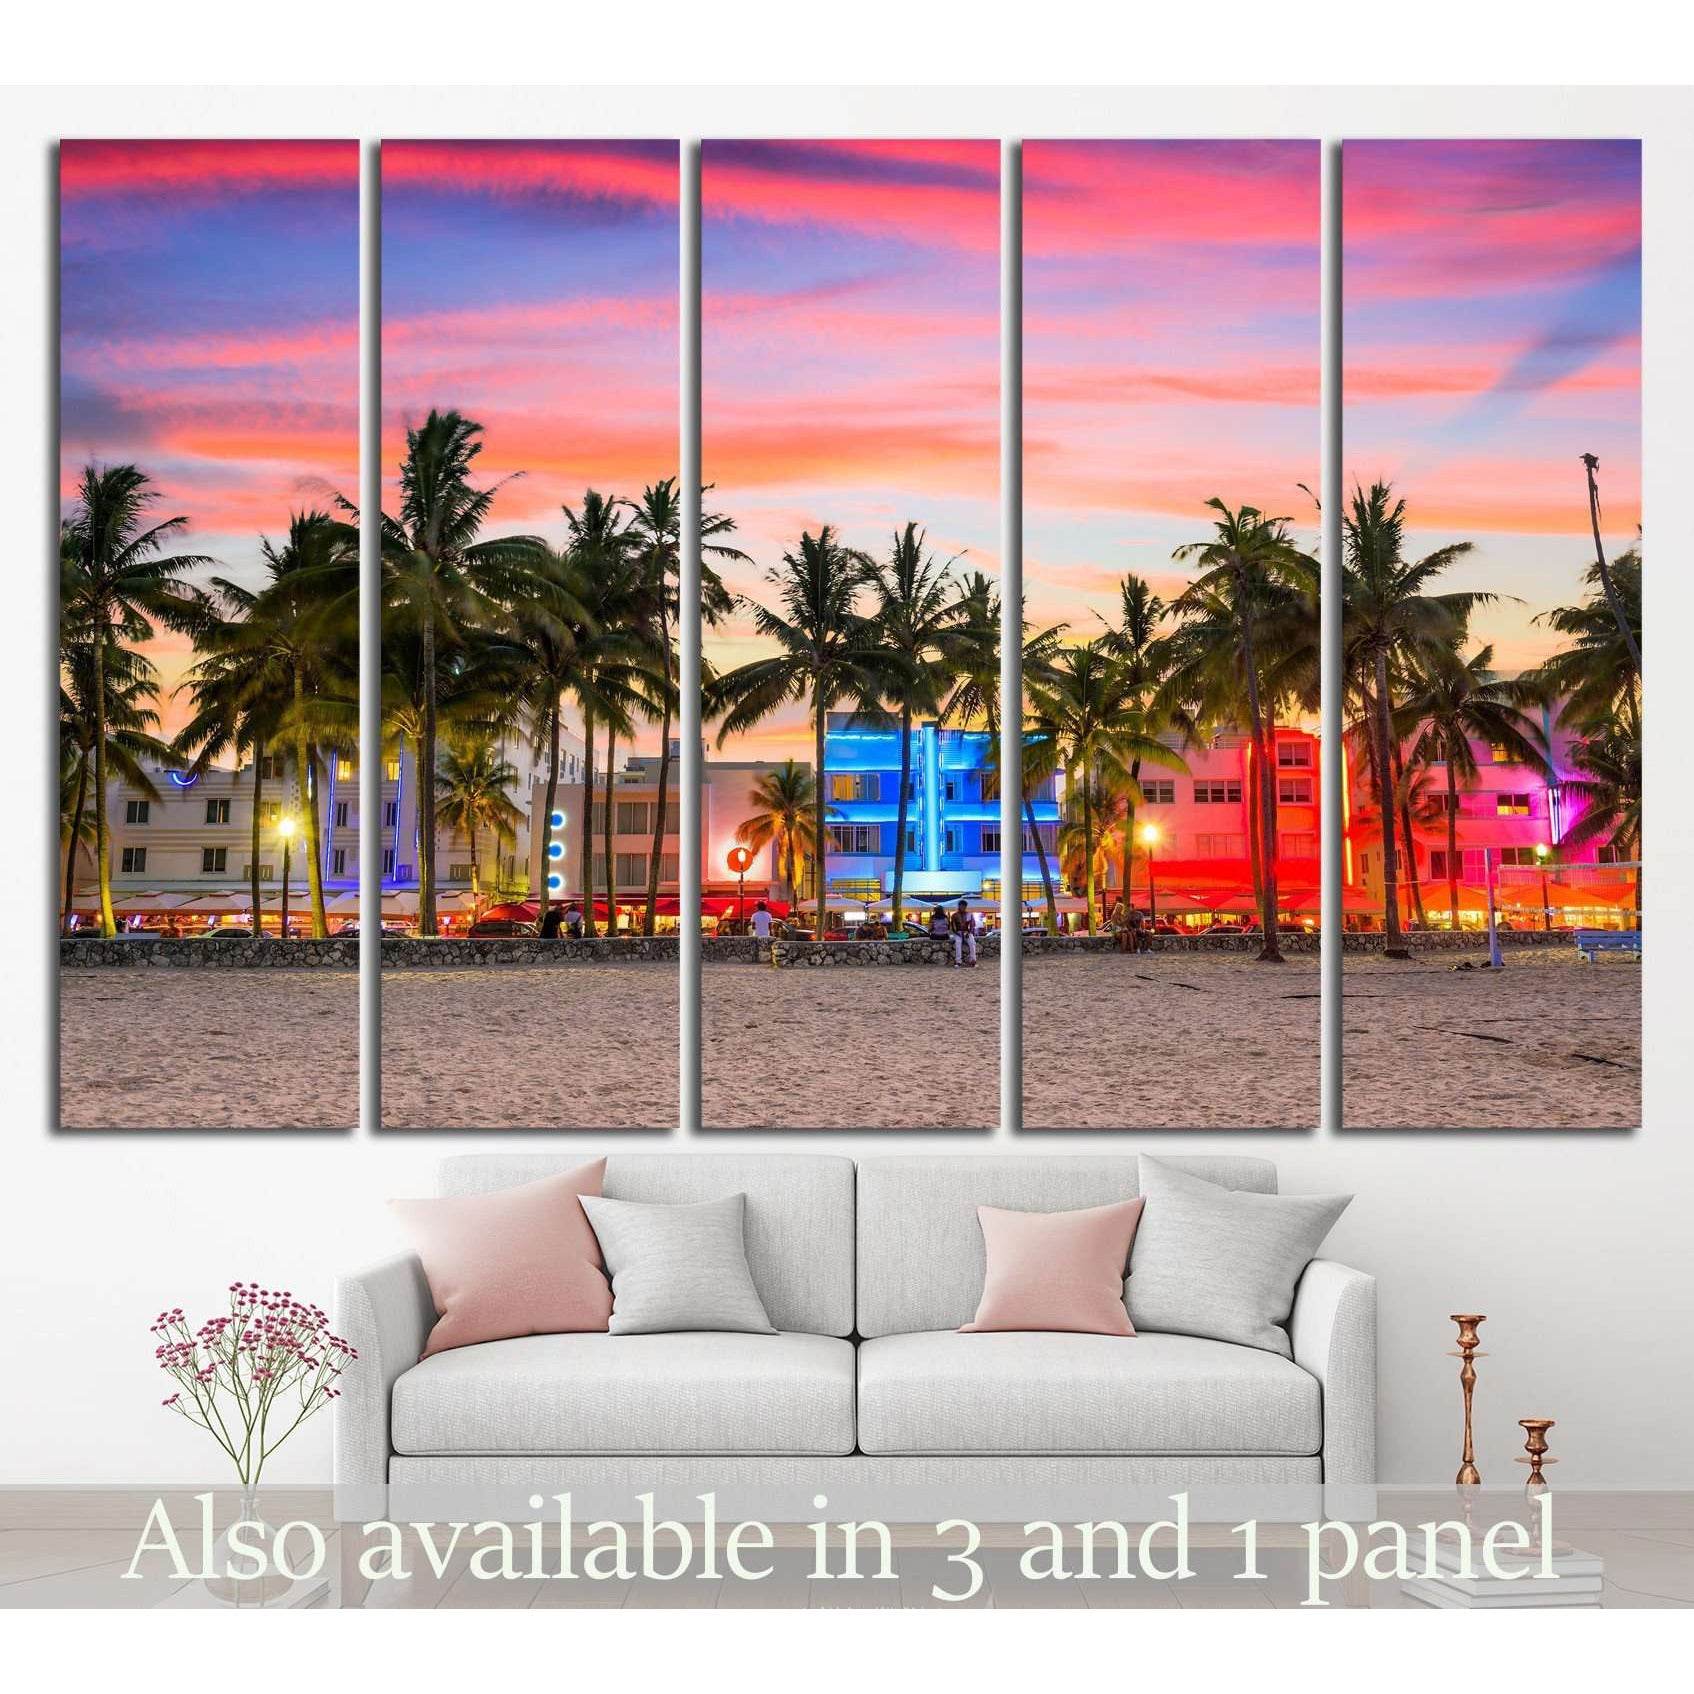 USA on Ocean Drive at sunset №1101 Ready to Hang Canvas Print